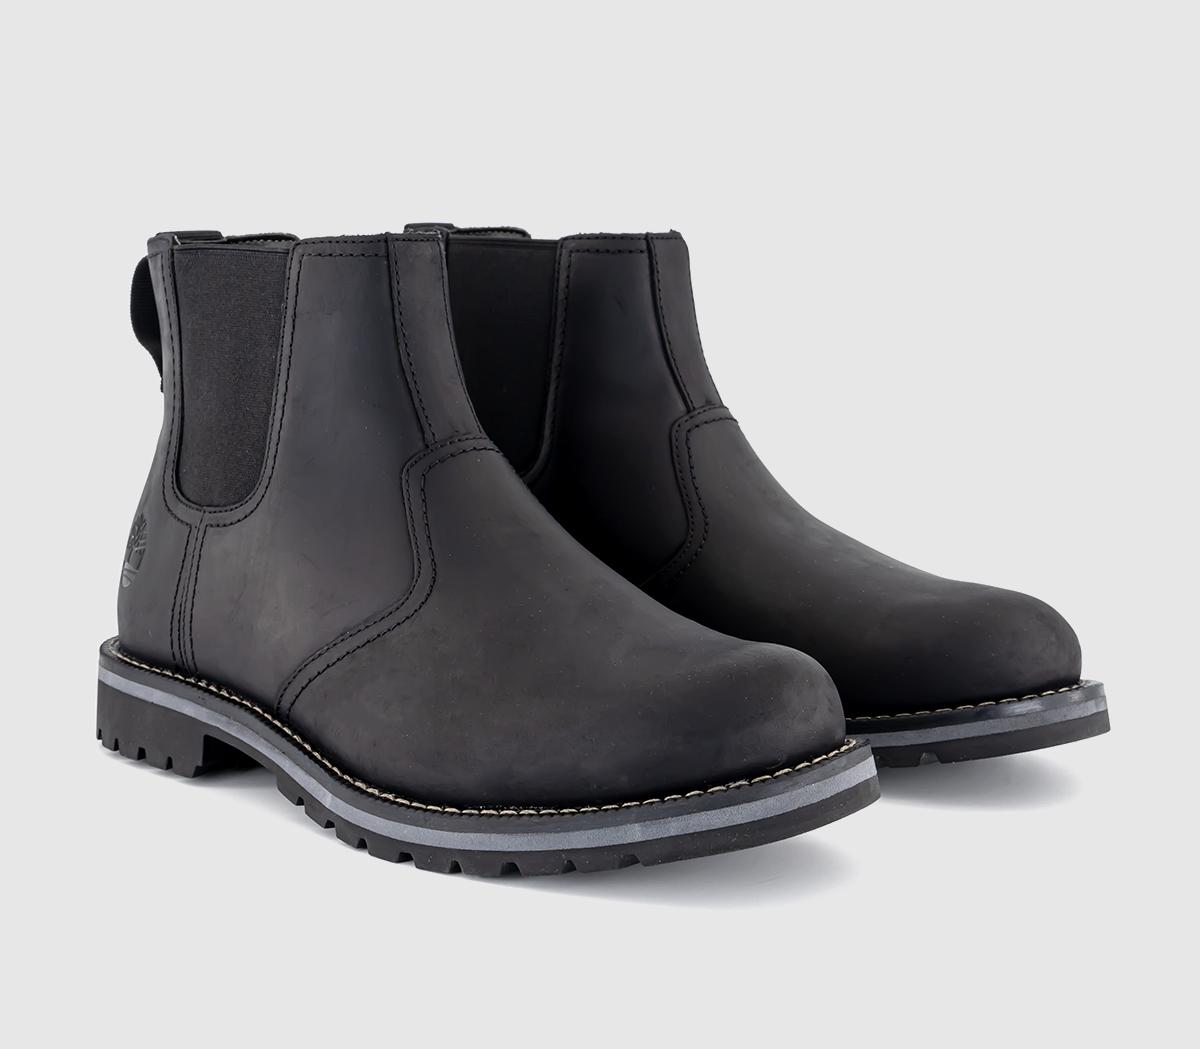 Timberland Larchmont Chelsea Boots Black - Men’s Boots